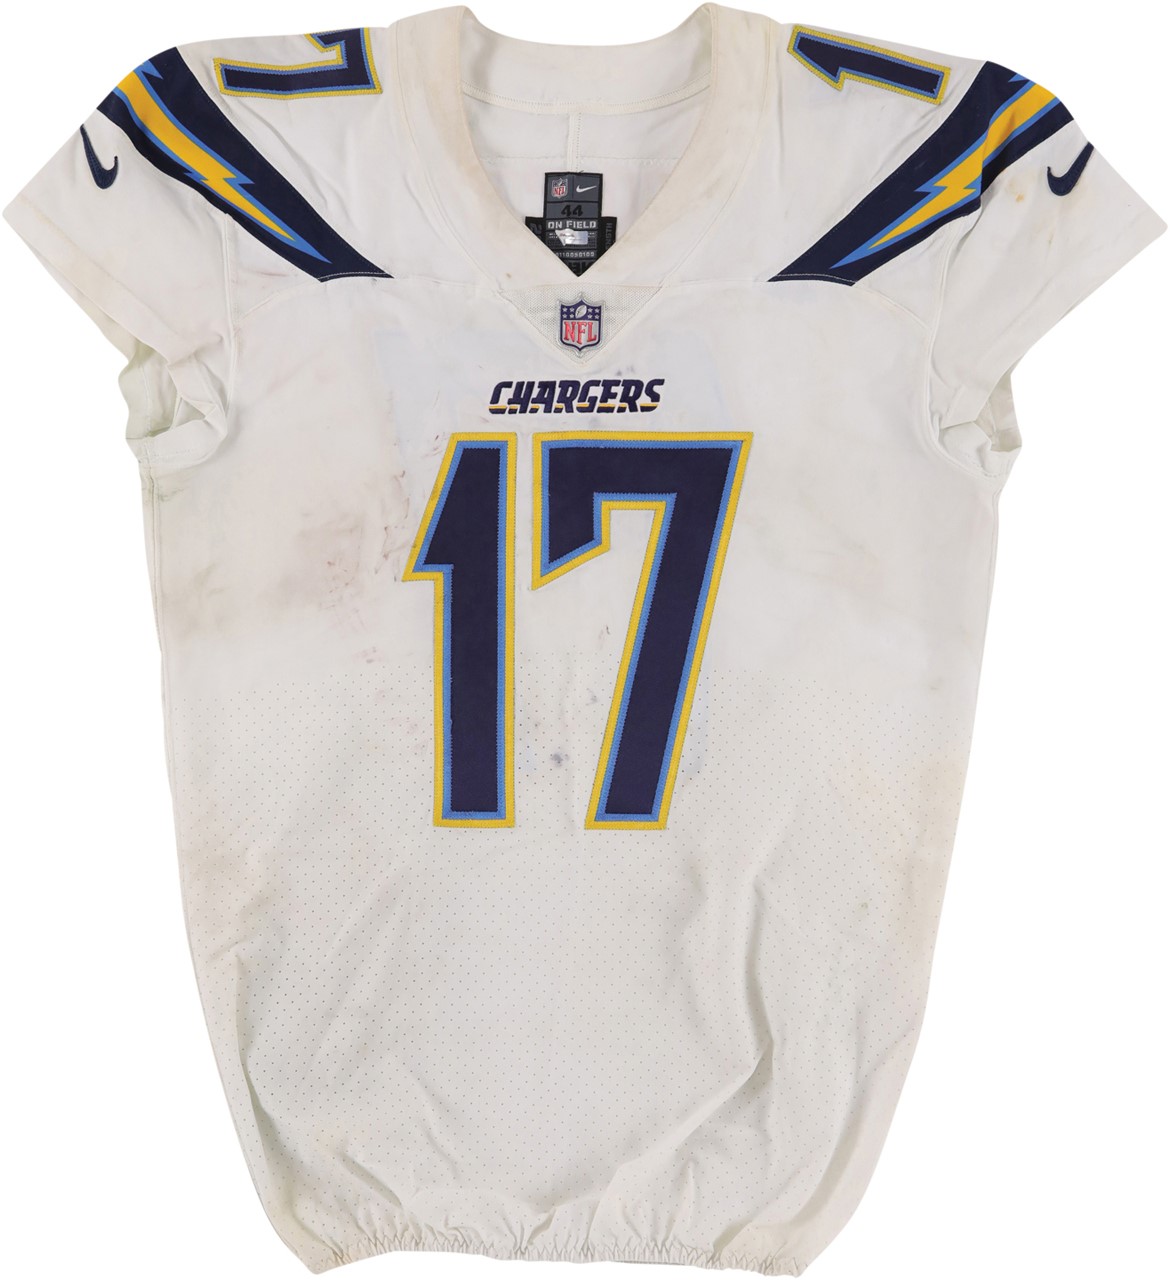 - 2017 Philip Rivers San Diego Chargers Game Worn Jersey - Photo-Matched to Two Games (Photo-Matching LOA & Chargers LOA)